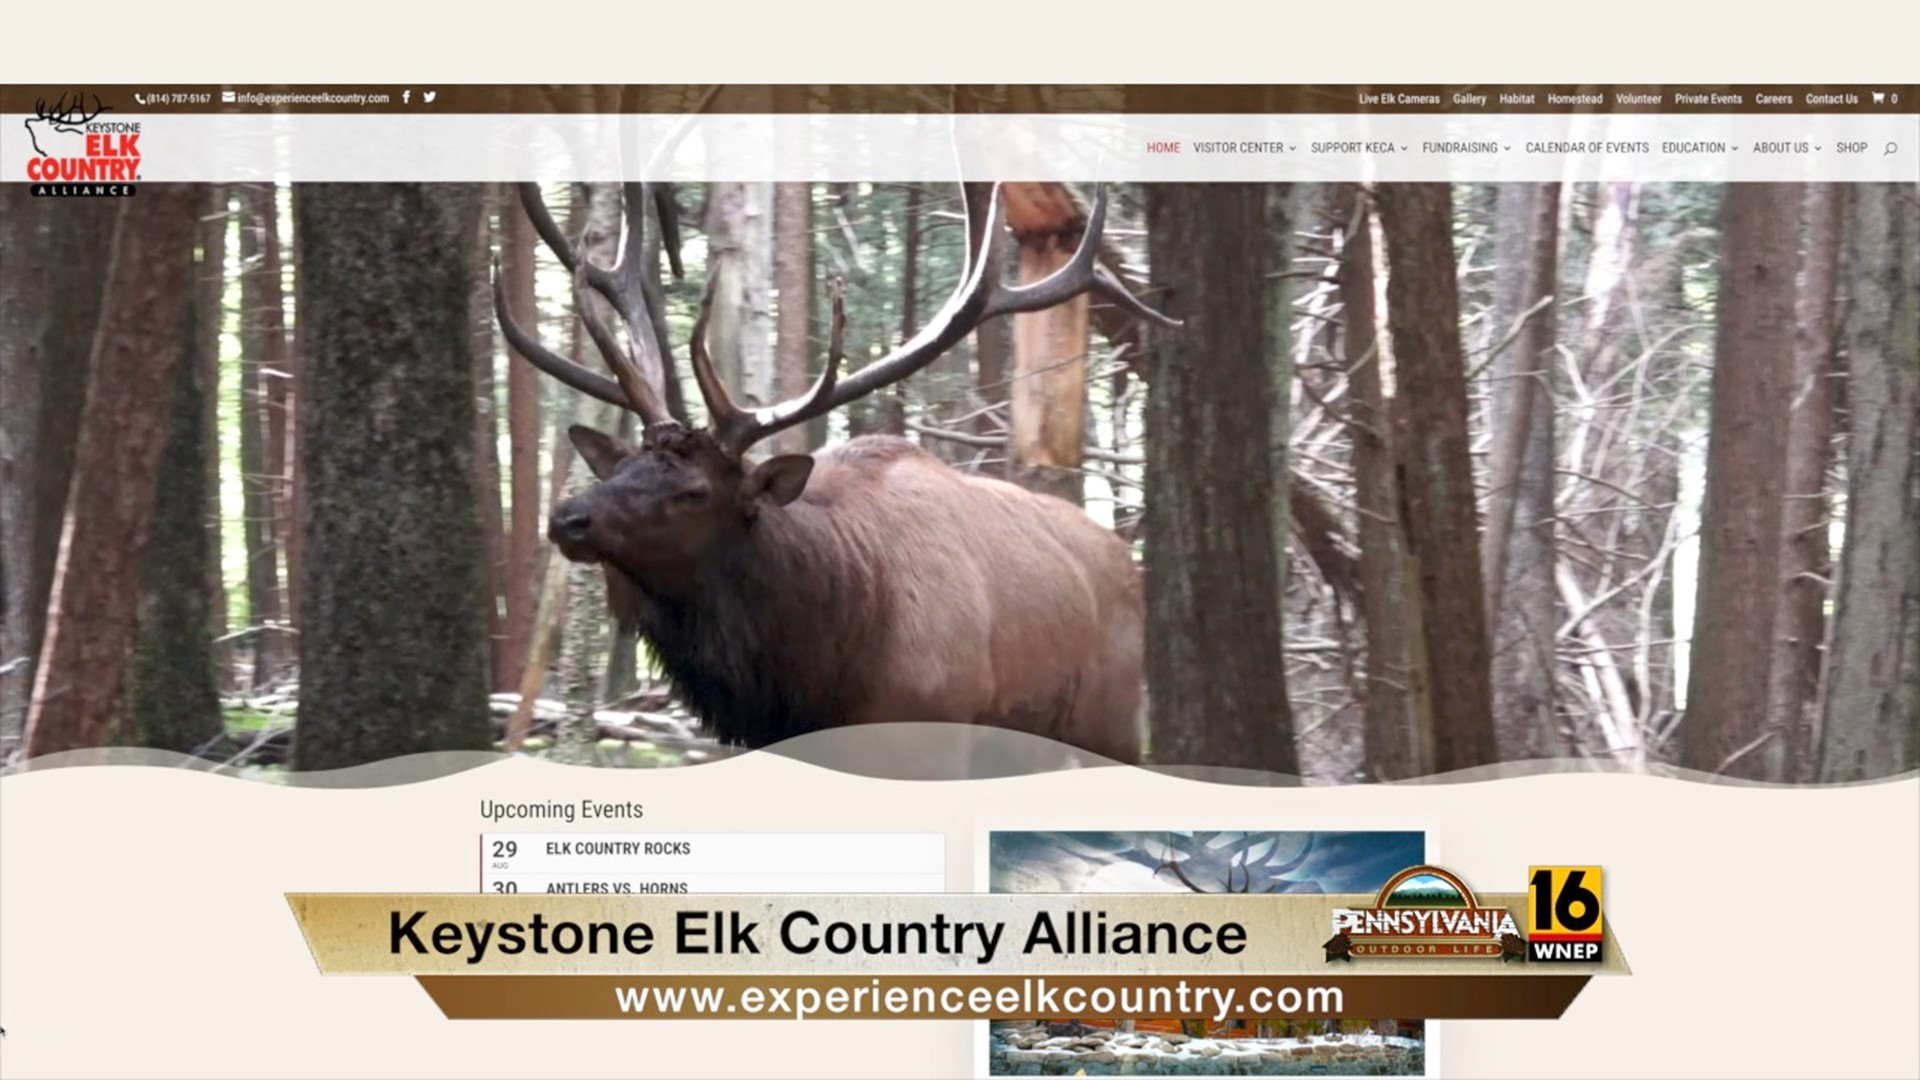 Key websites for you if you plan on visiting elk country.